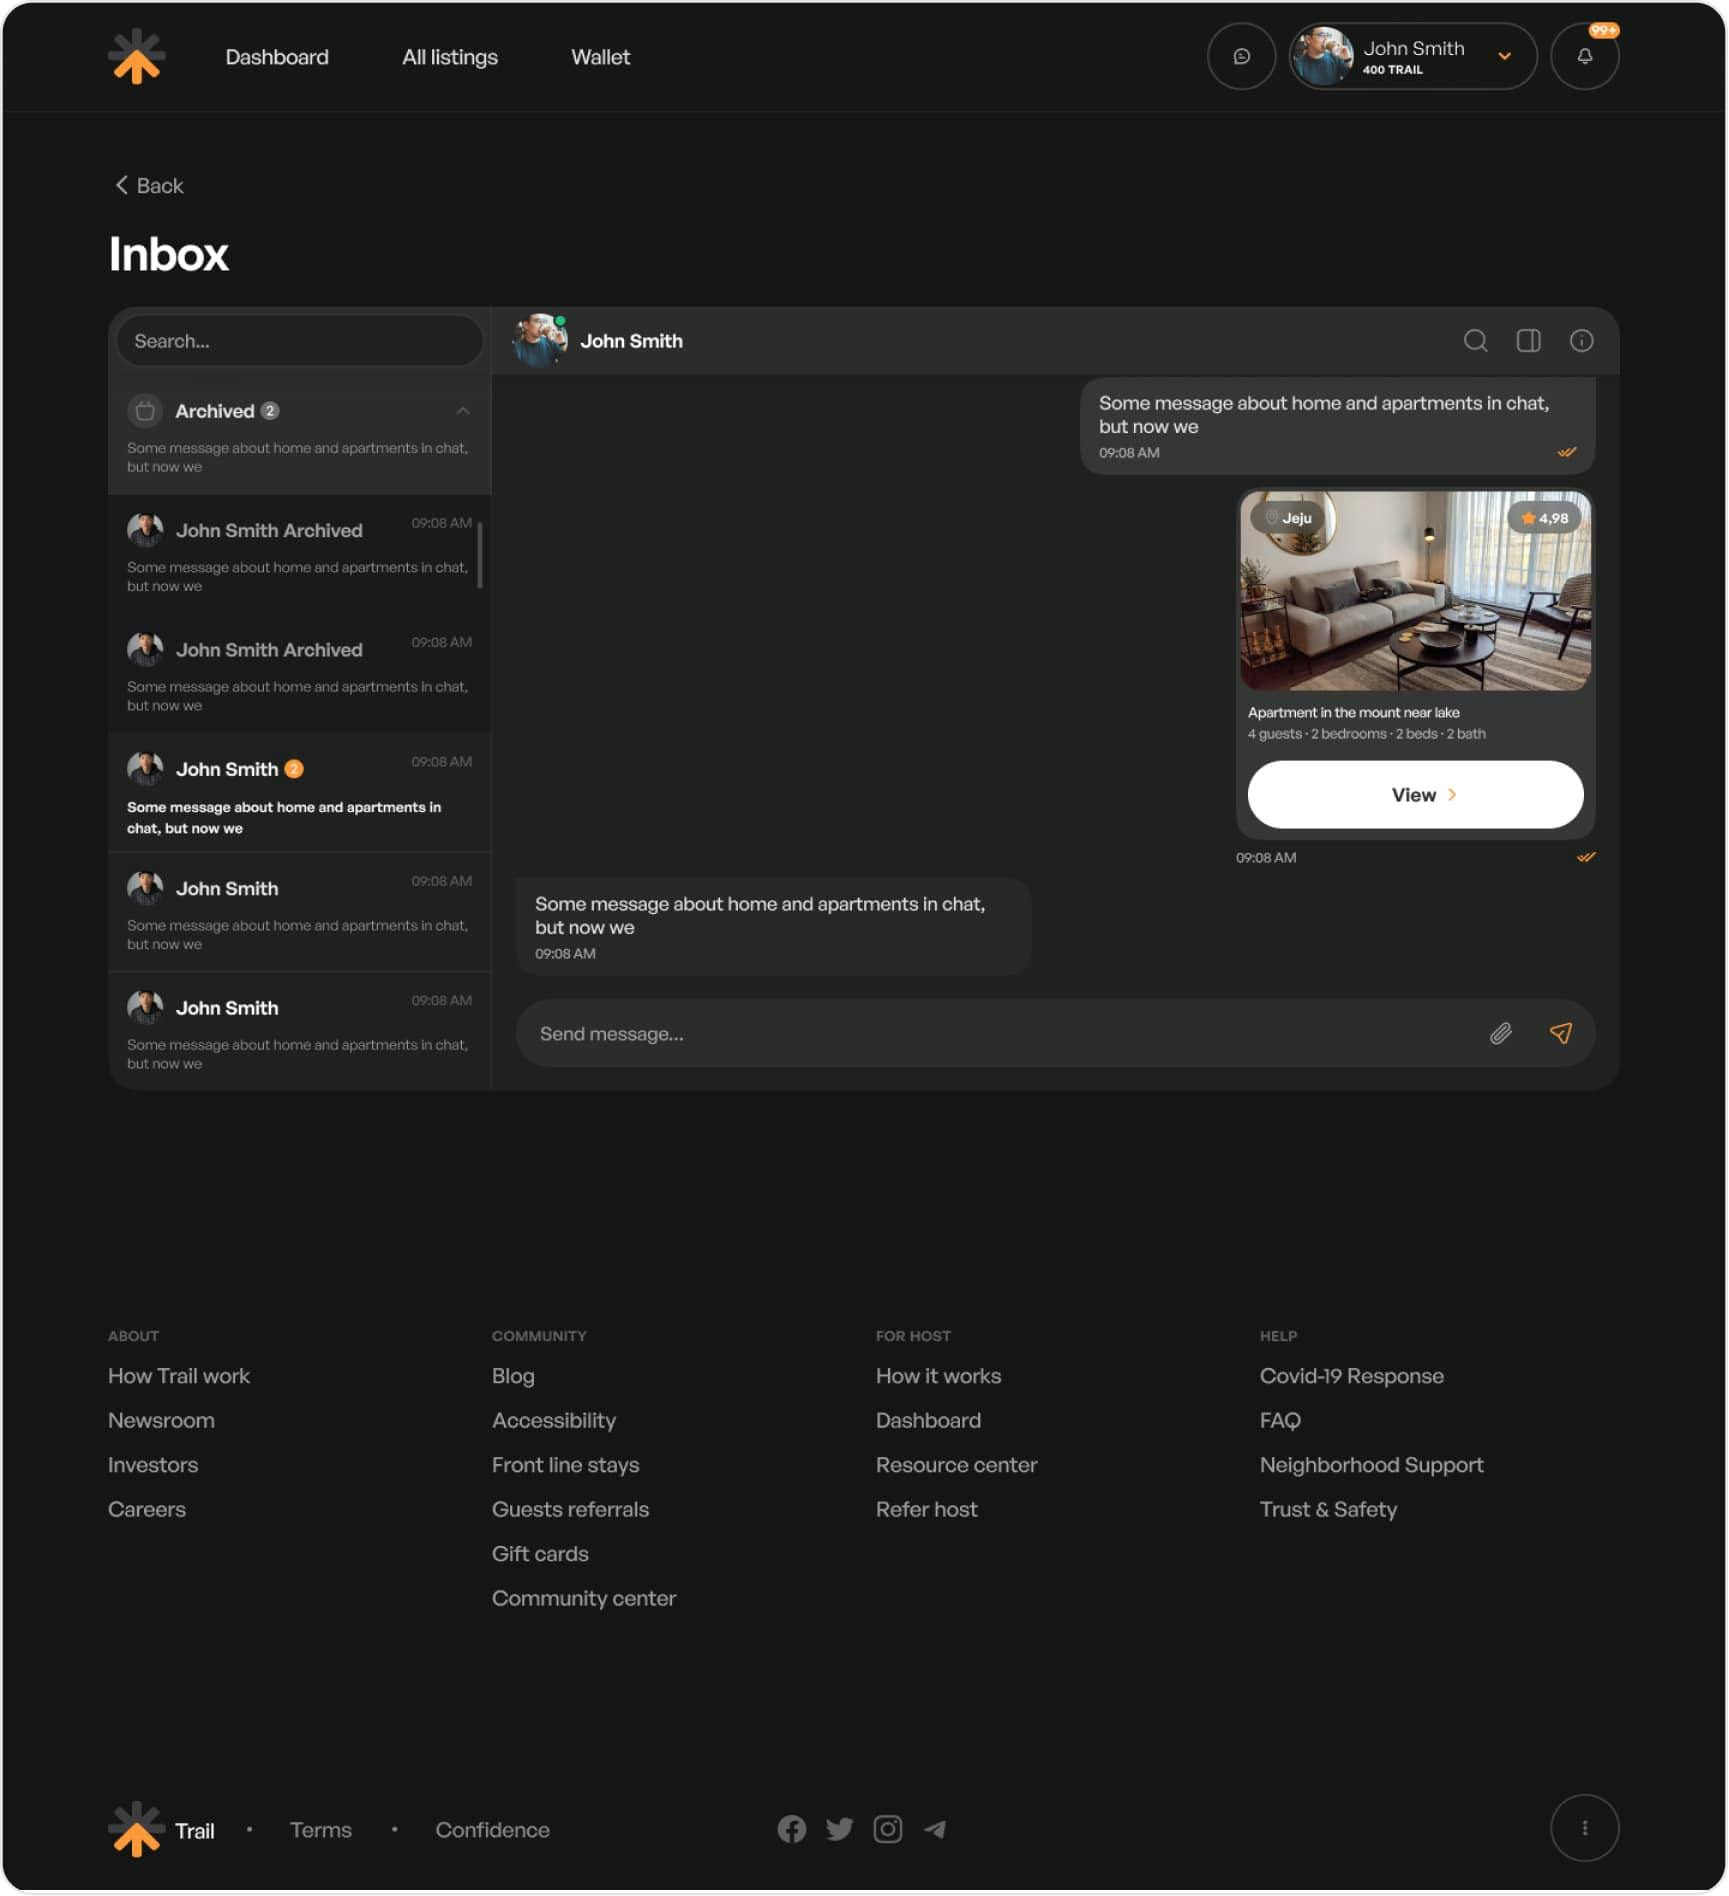 Service pages